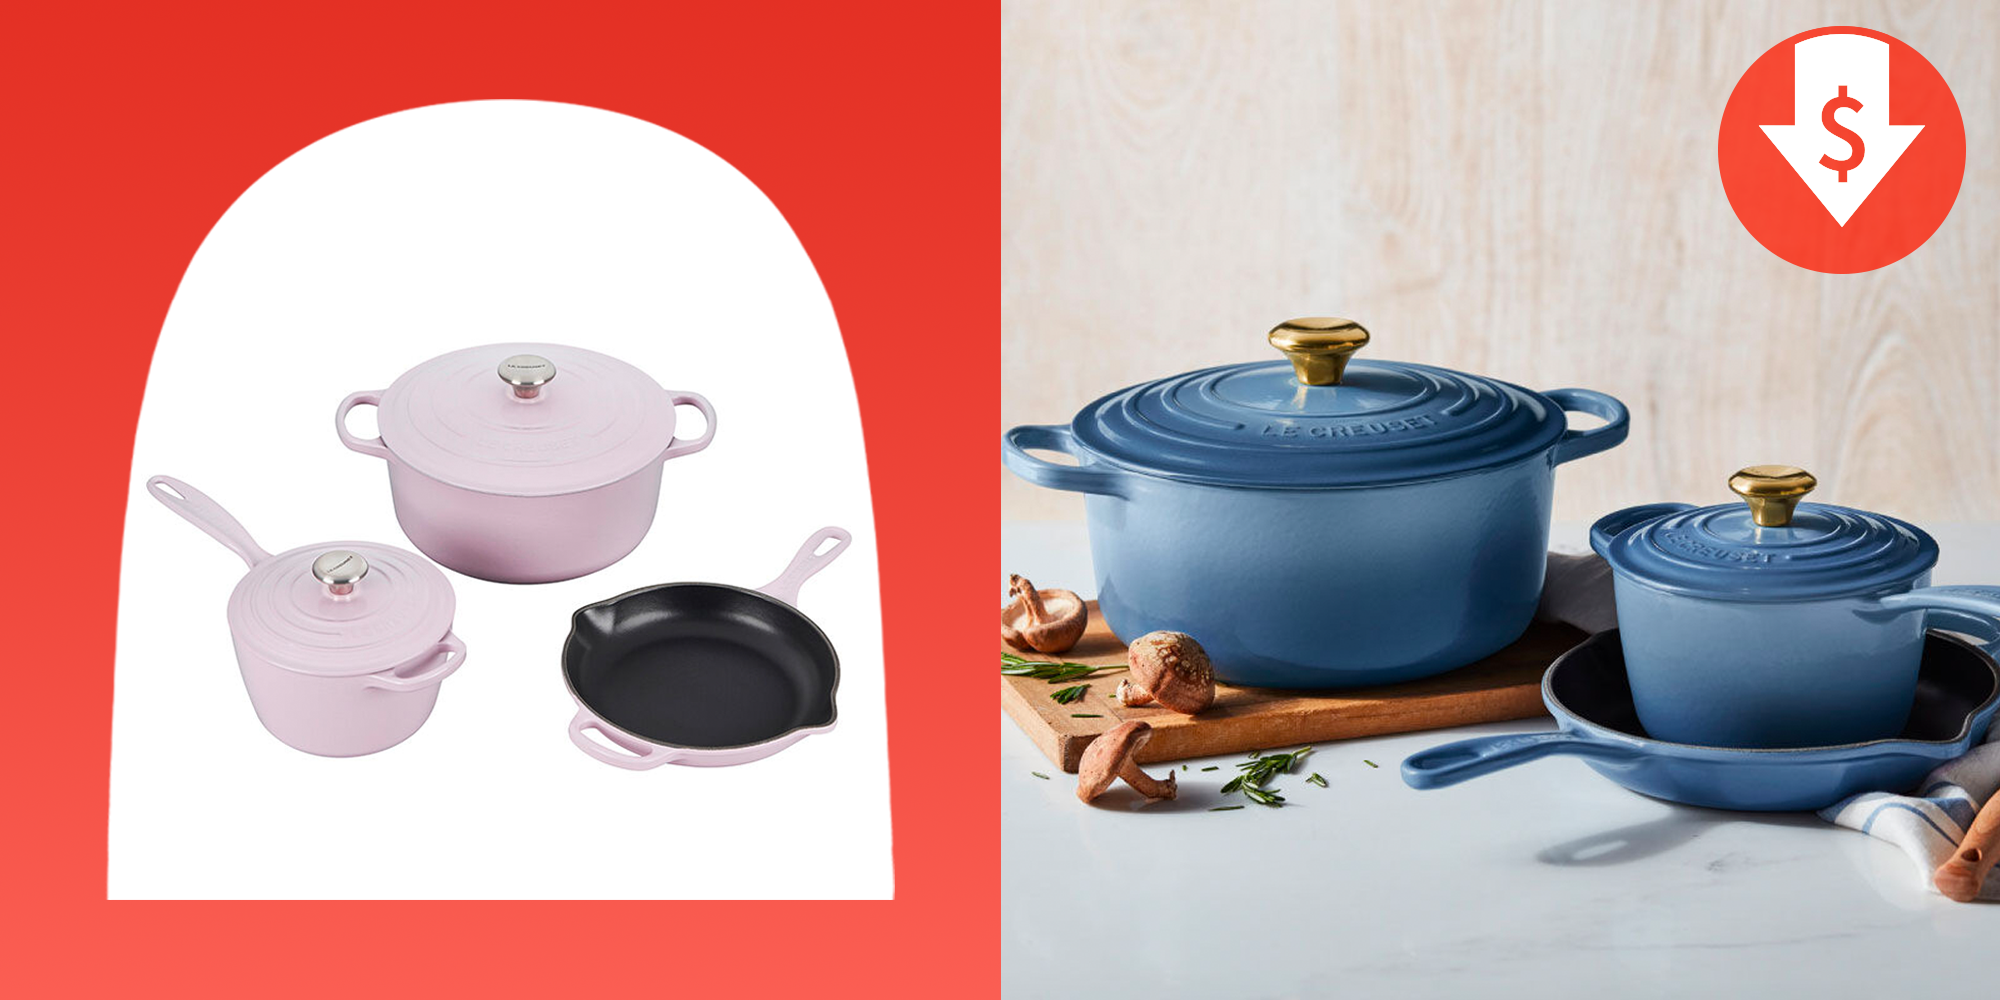 The Creuset Cookware Set Everyone Is 30% Off Right Now